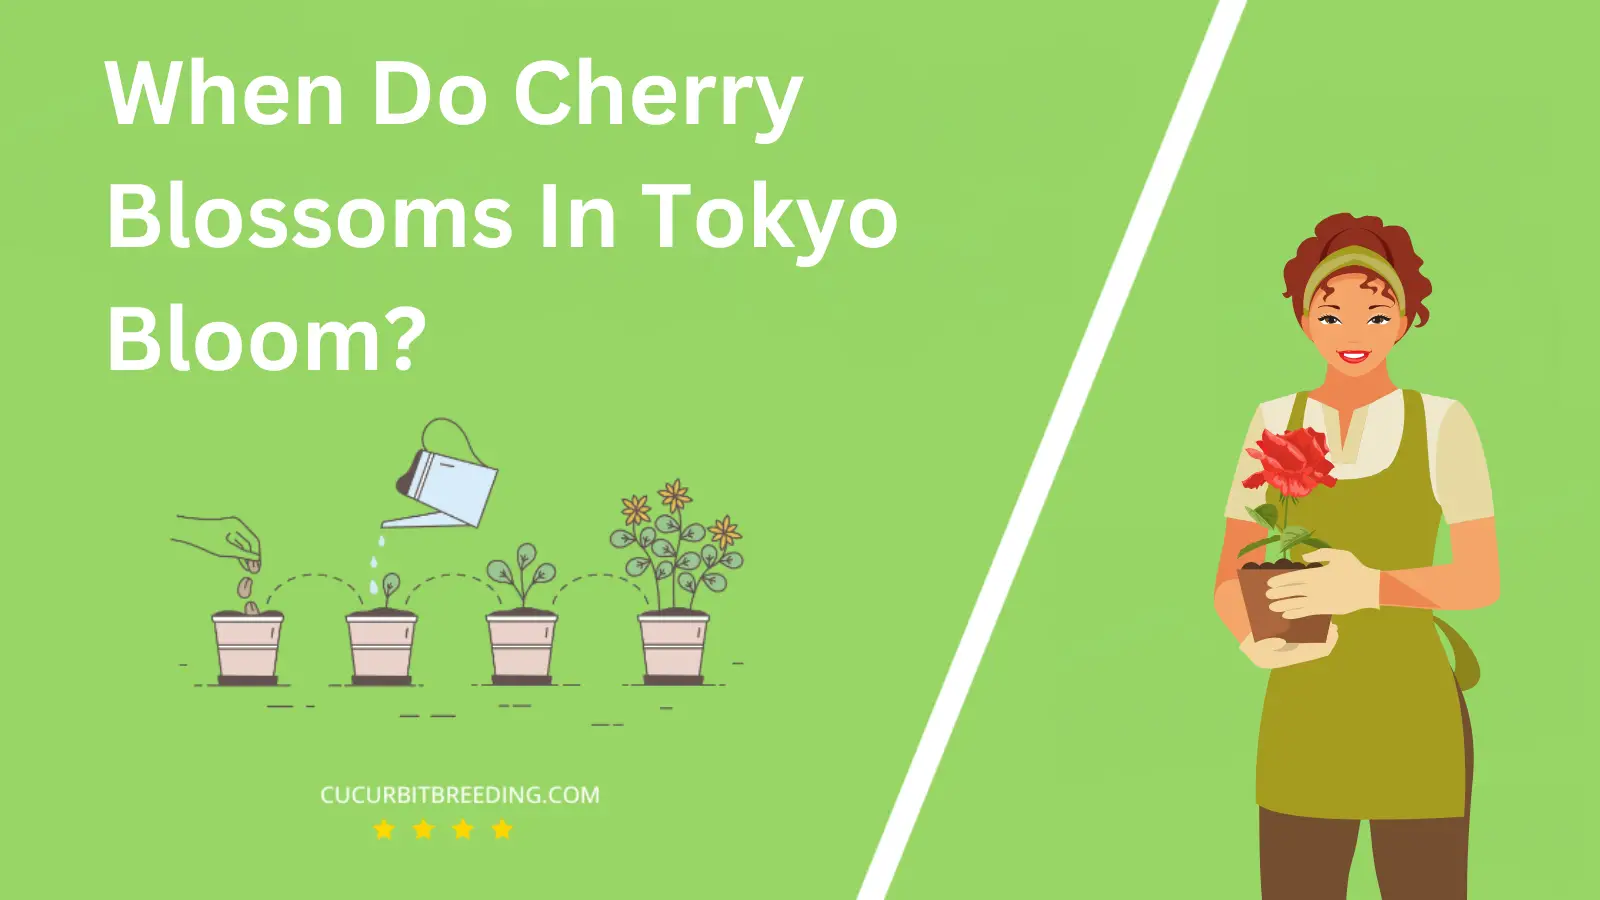 When Do Cherry Blossoms In Tokyo Bloom?